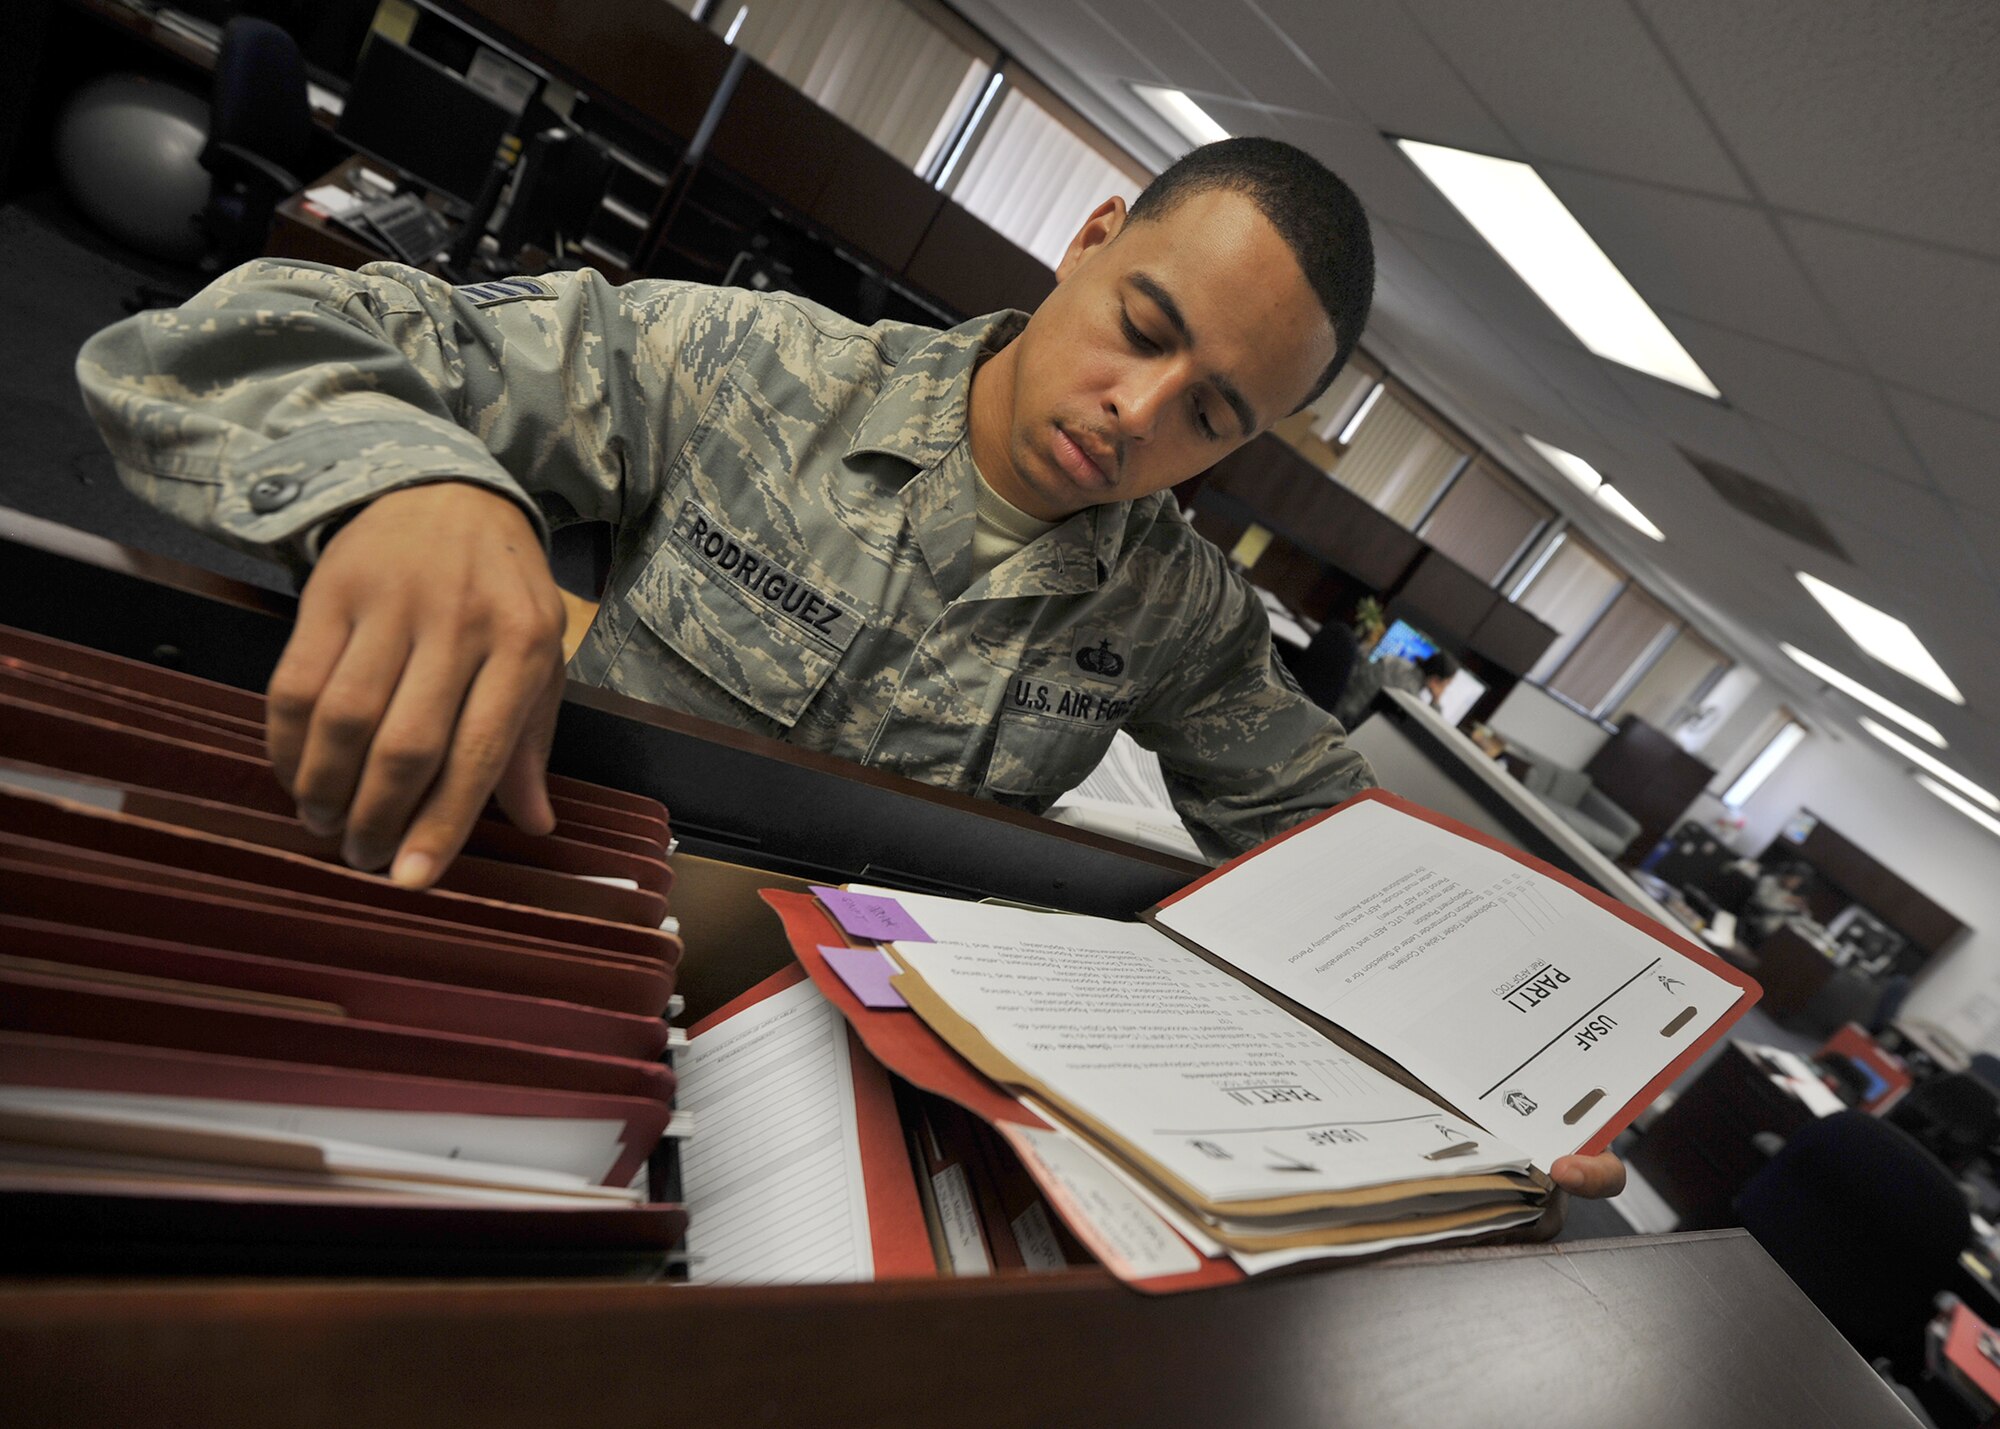 Staff Sgt. Roberto Rodriguez, 325th Force Support Squadron unit deployment manager, sorts and files mobility folders for deploying or likely deploying service members Oct. 28 at the Military Personnel Section building. The overall mission of the Operations Flight is to oversee and manage peacetime as well as wartime contingency planning and execution. Operational planning is a structured process for orderly transition from peace to war and post-hostilities operations. (U.S. Air Force photo by Senior Airman Ty-Rico Lea/Released)